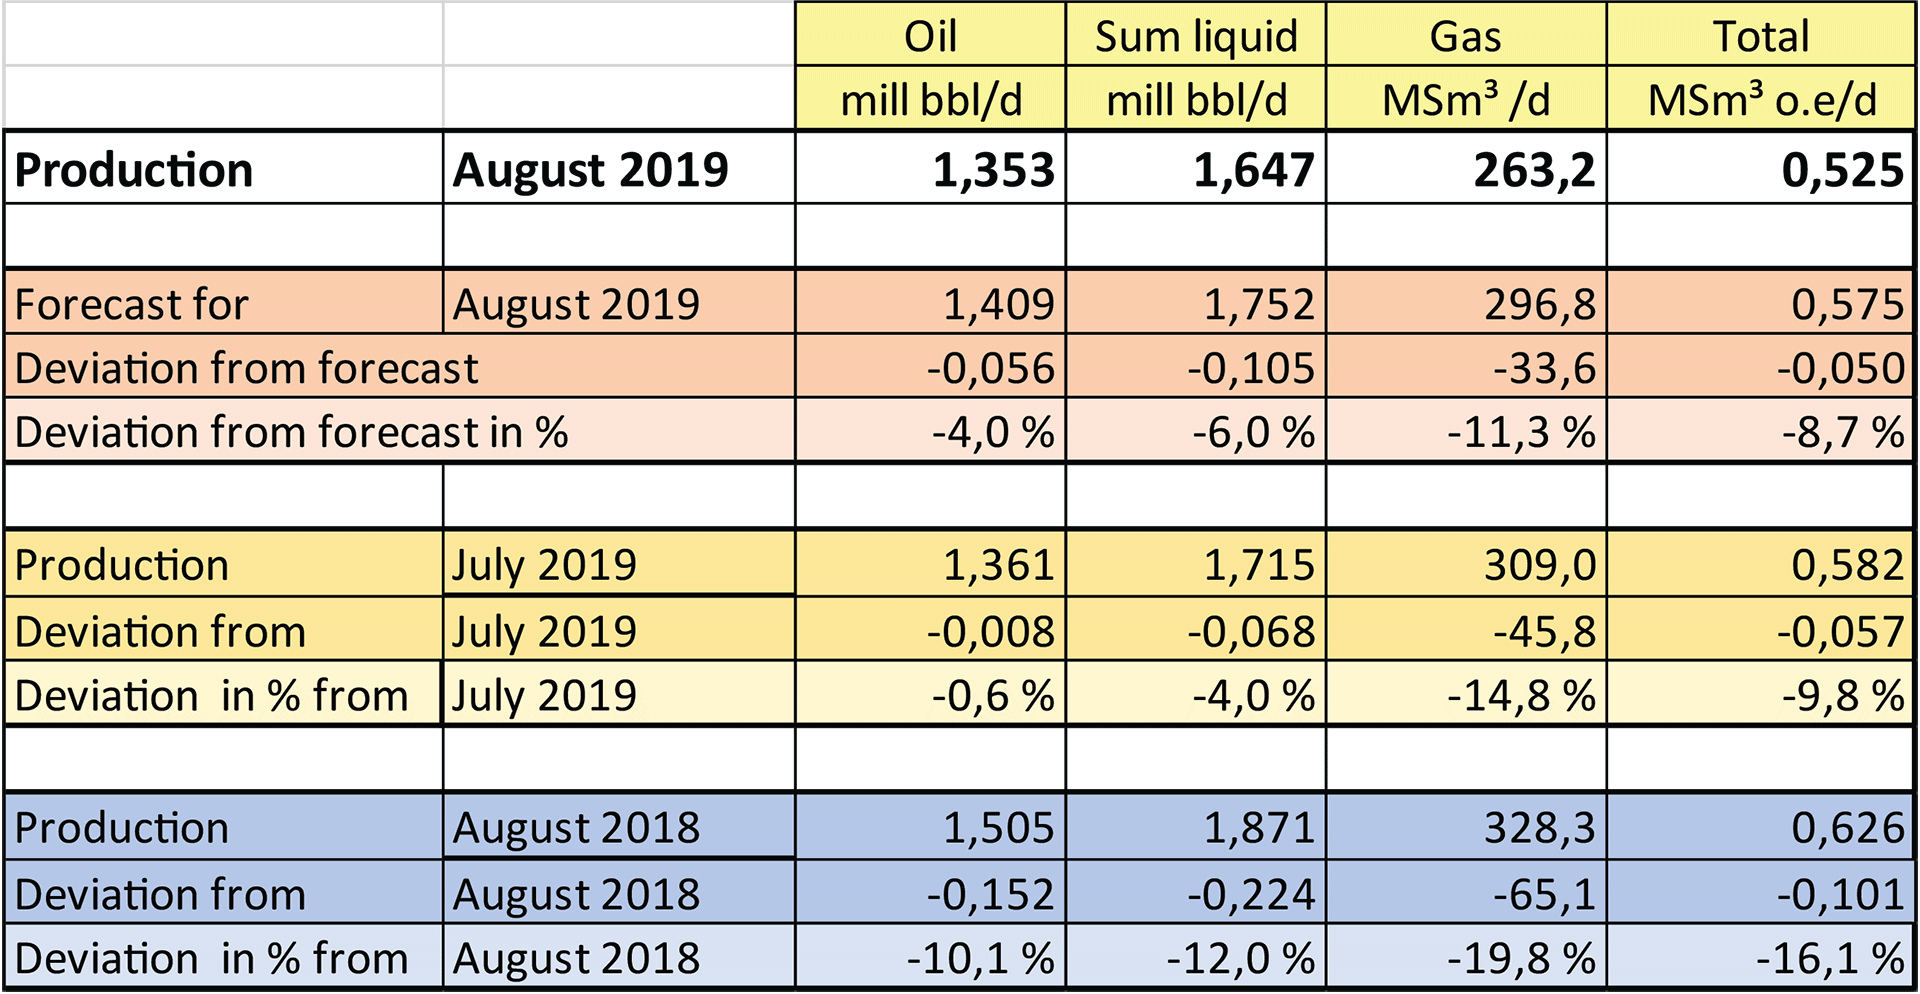 Table showing production of oil and gas for August 2019